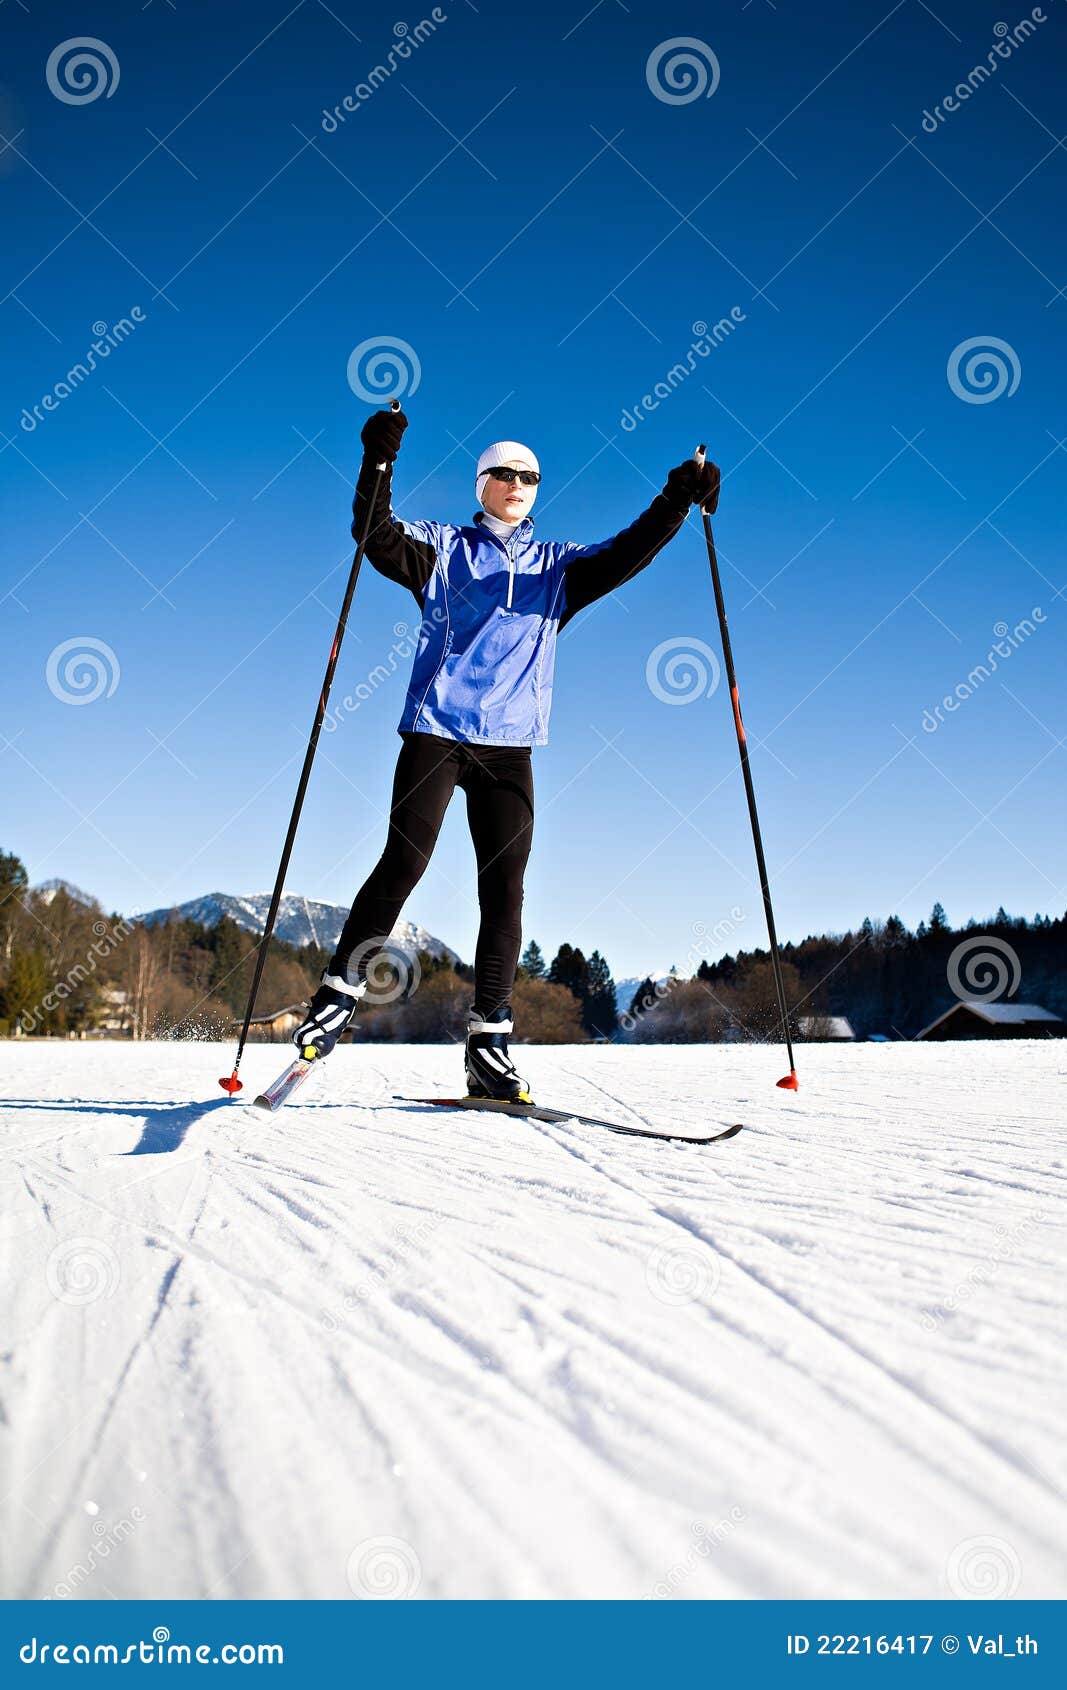 free clipart cross country skiing - photo #42